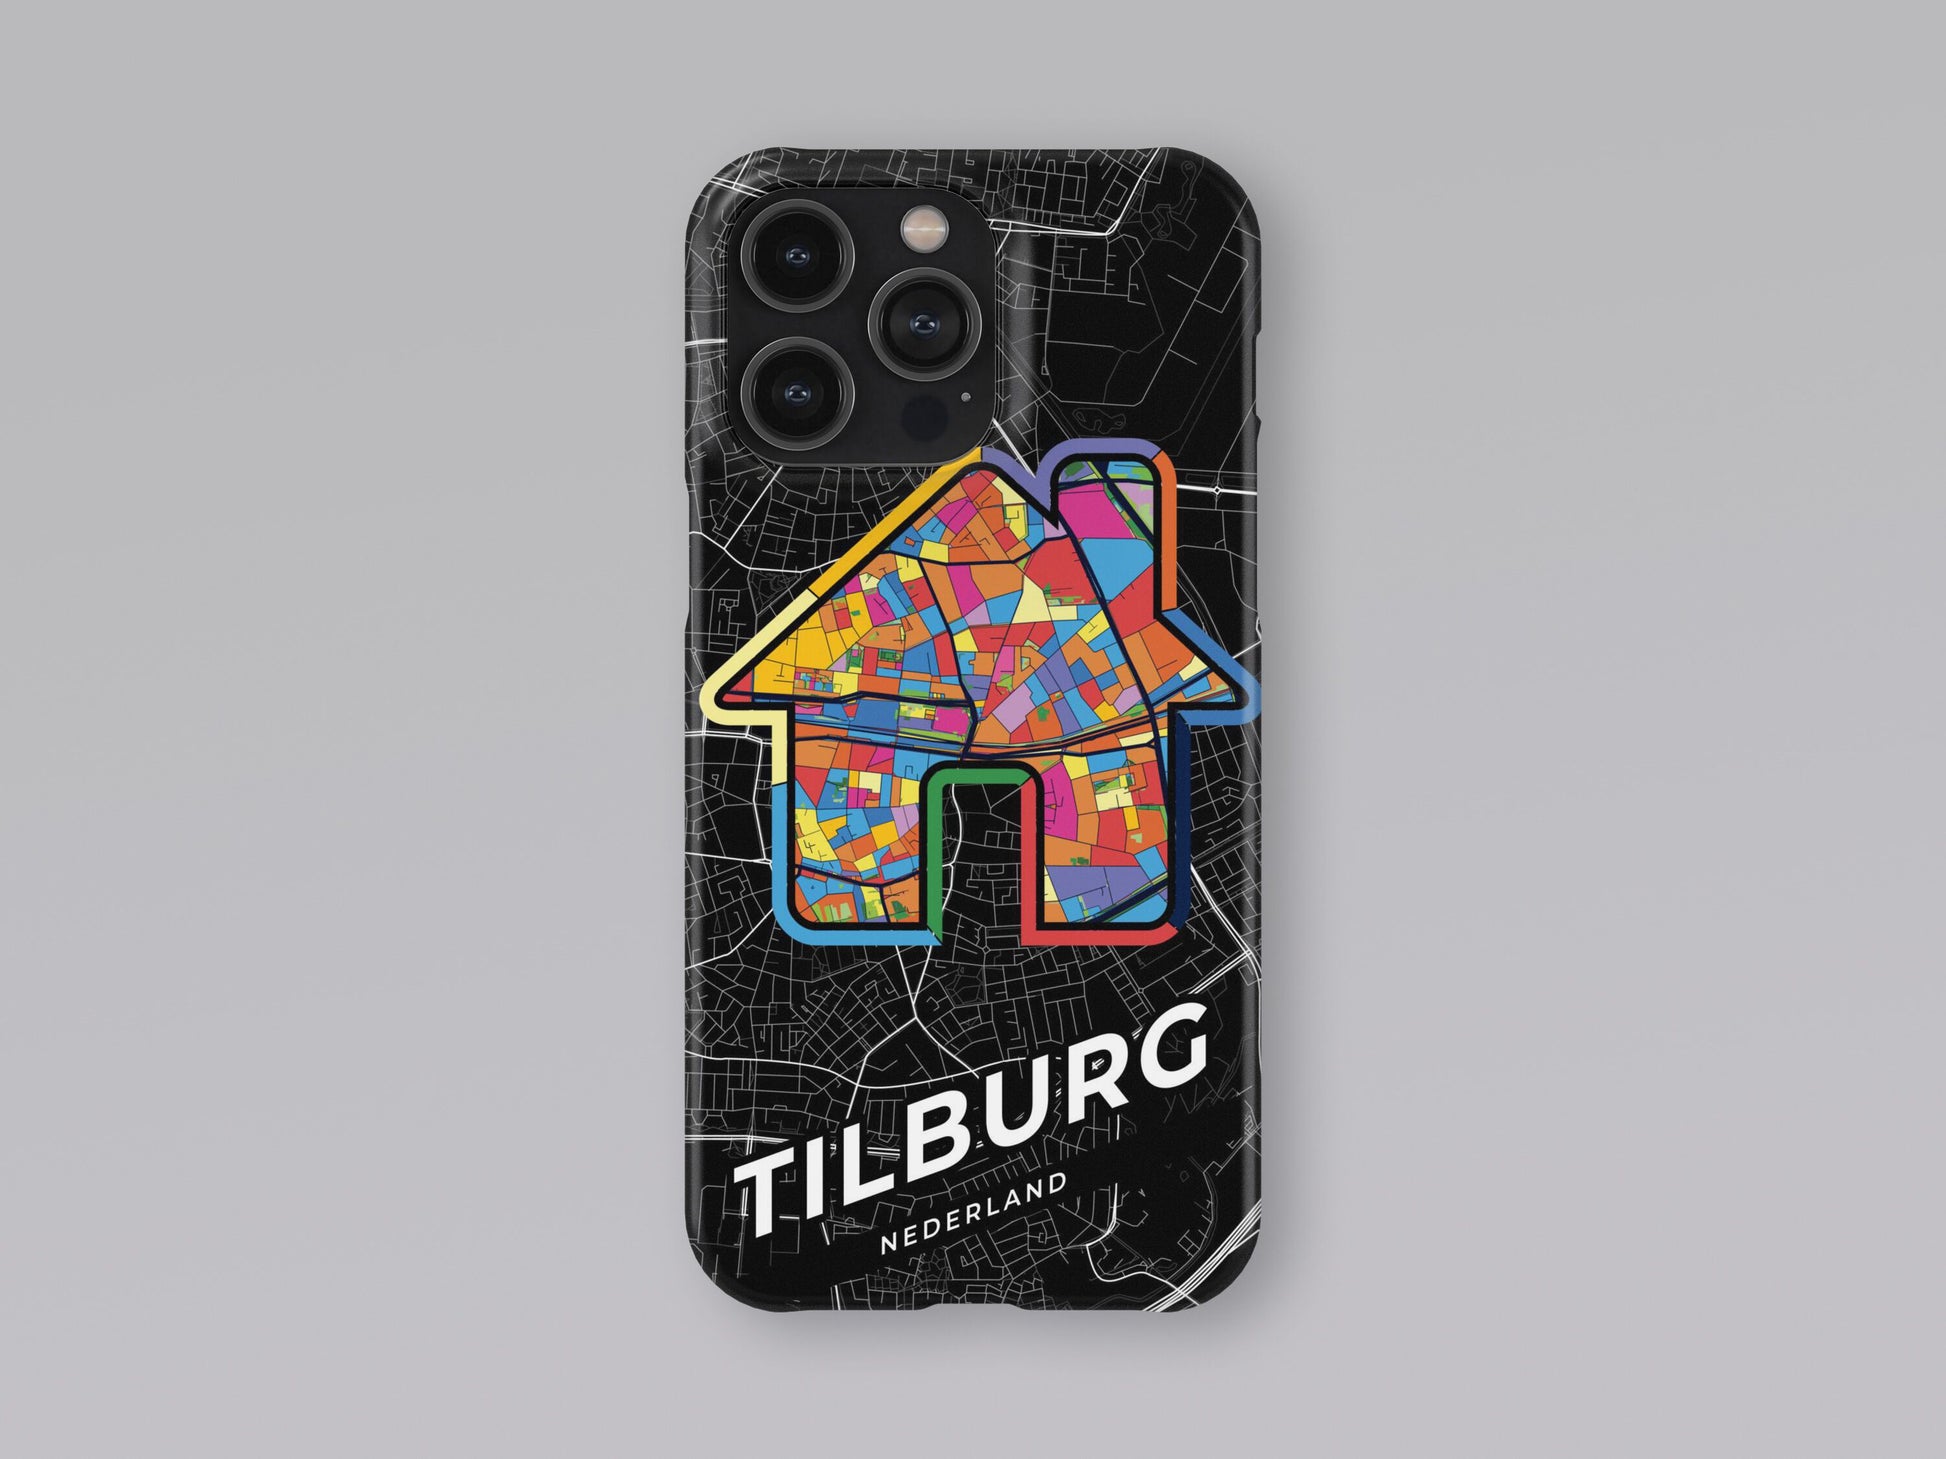 Tilburg Netherlands slim phone case with colorful icon. Birthday, wedding or housewarming gift. Couple match cases. 3